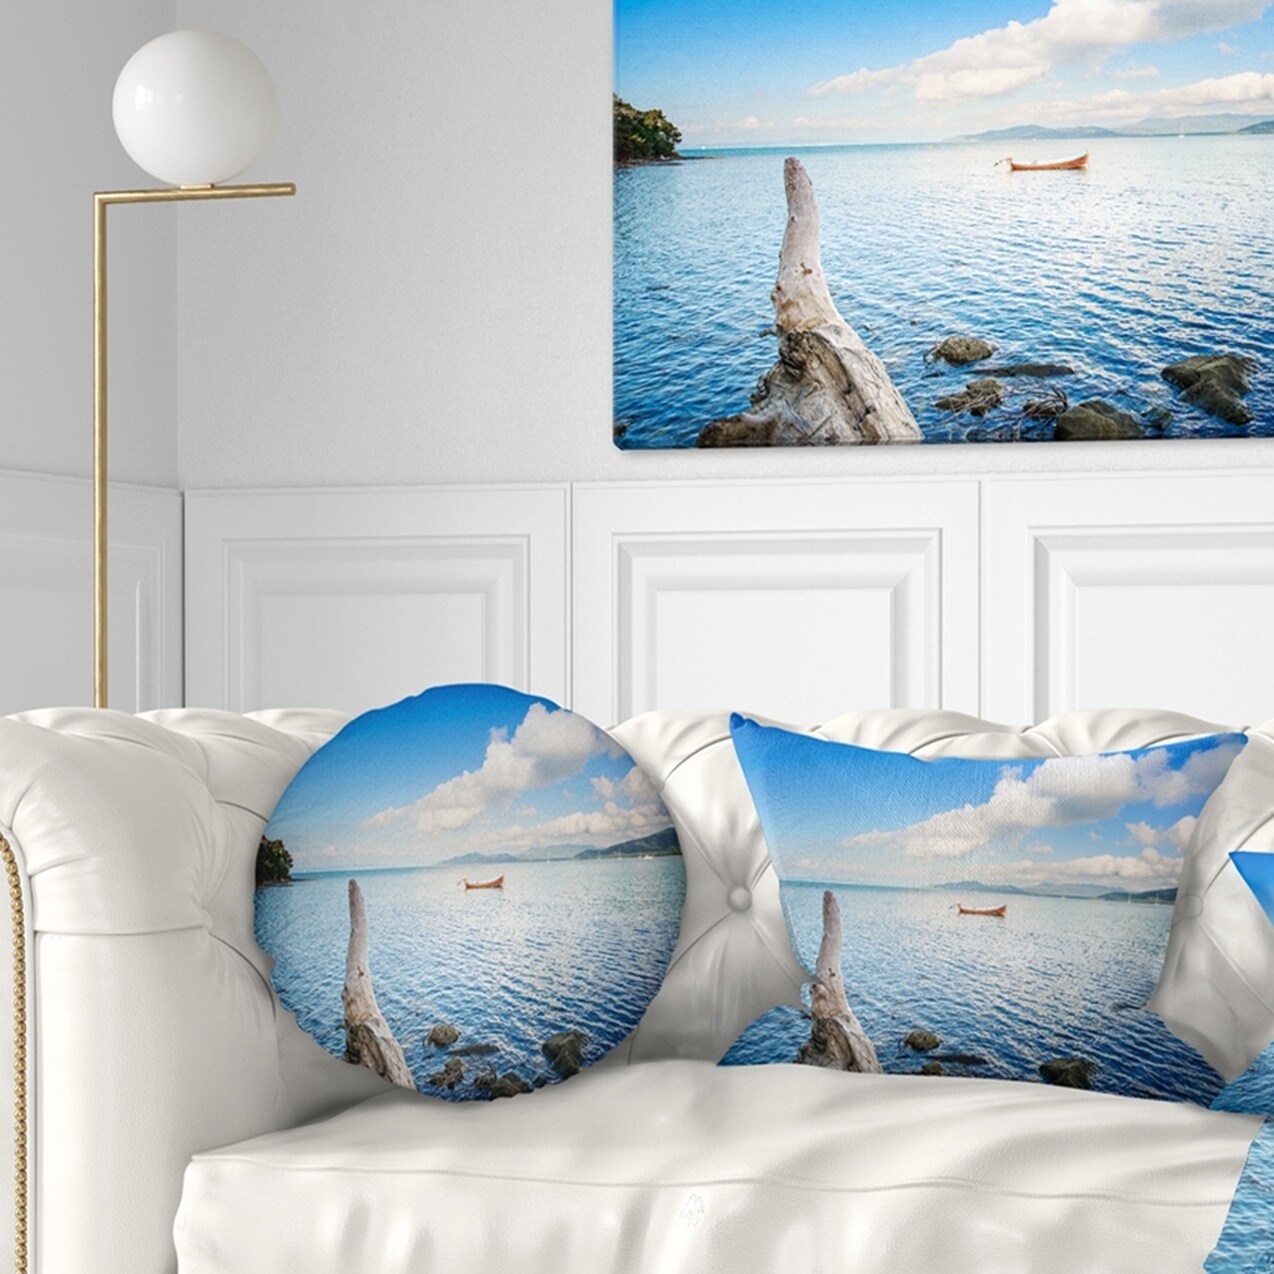 https://ak1.ostkcdn.com/images/products/20944670/Designart-Small-Wooden-Boat-and-Tree-Trunk-Seashore-Throw-Pillow-3920a10c-9dcb-4351-85f4-c58025582b12.jpg